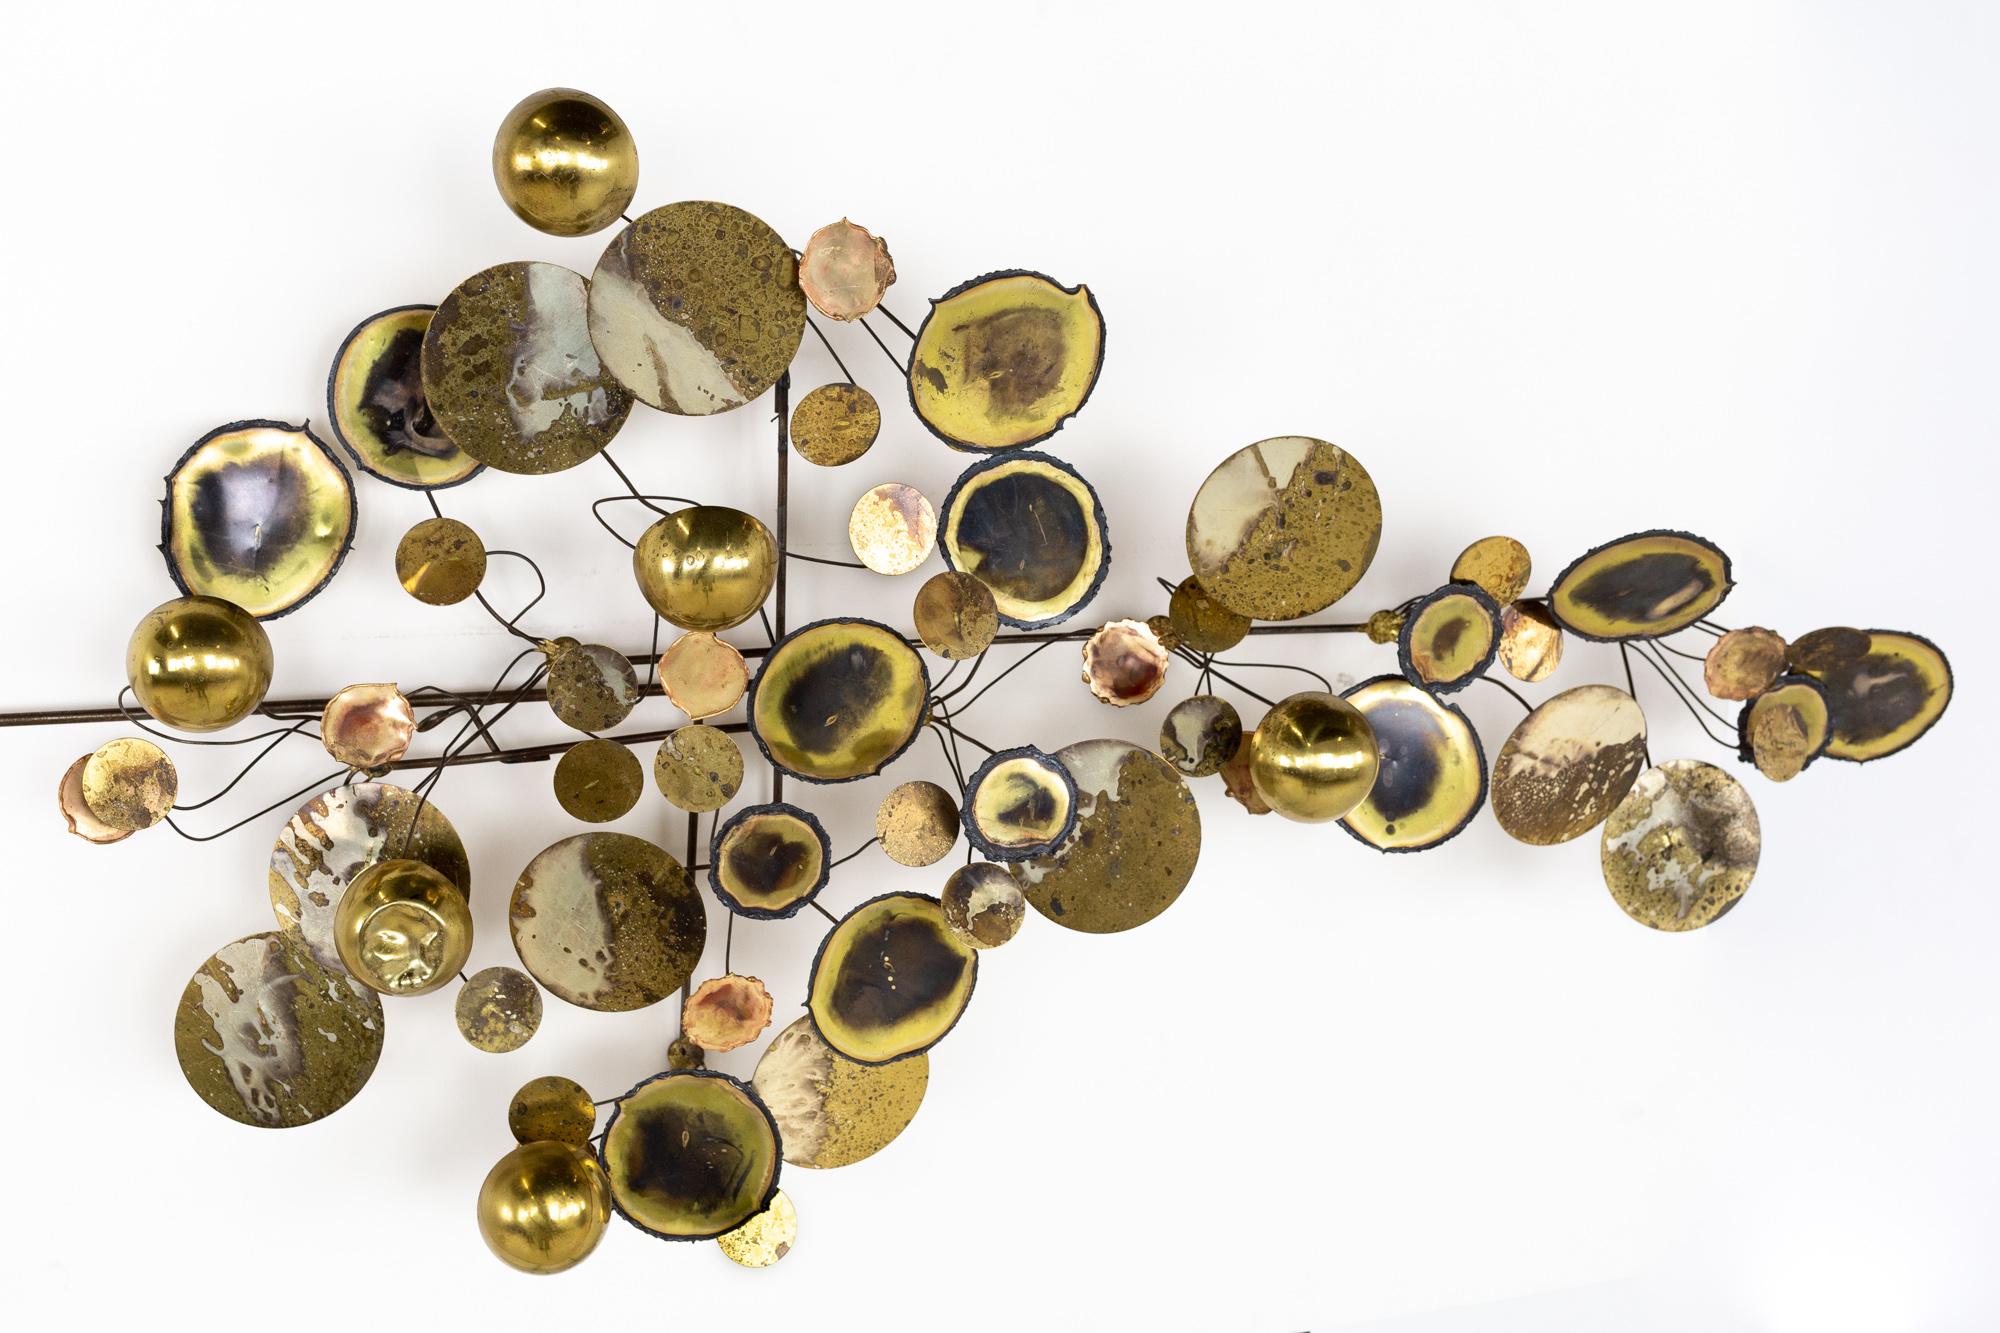 Curtis Jere mid century brass raindrops sculpture
This piece measures: 22 wide x 7.5 deep x 40.5 inches high

All pieces of furniture can be had in what we call restored vintage condition. That means the piece is restored upon purchase so it’s